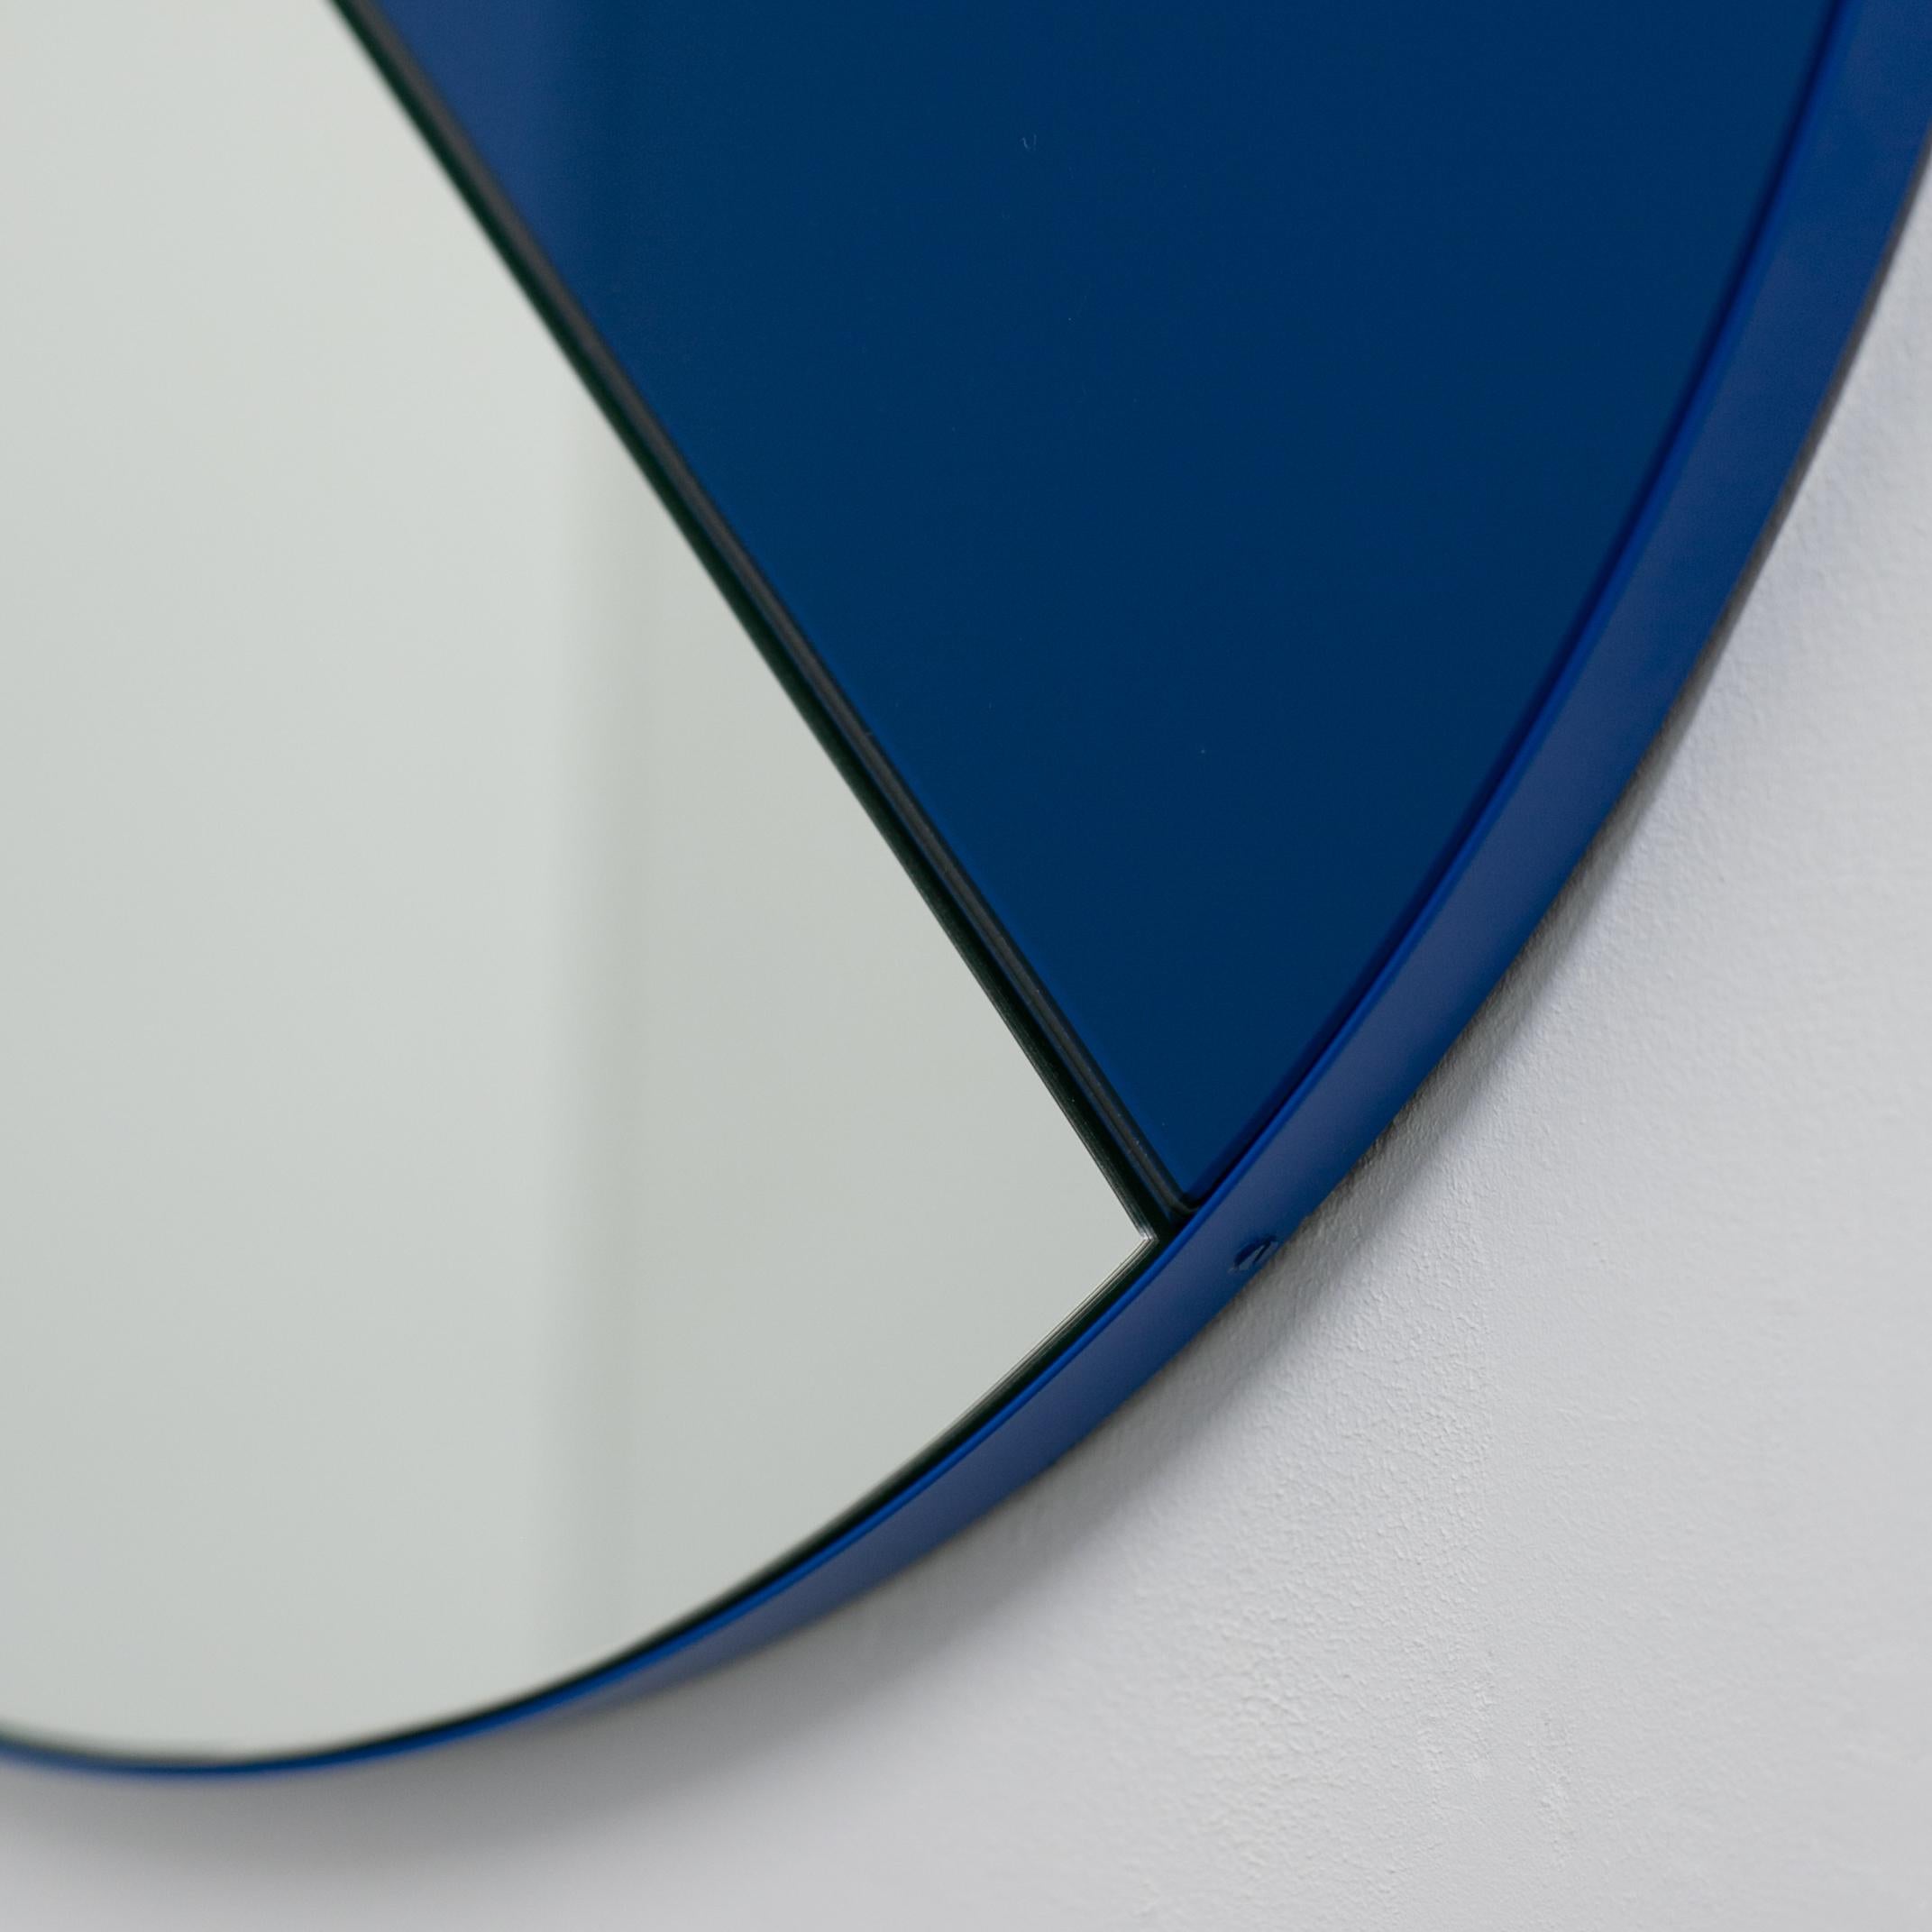 Orbis Dualis Contemporary Blue and Silver Round Mirror with Blue Frame, Large For Sale 5